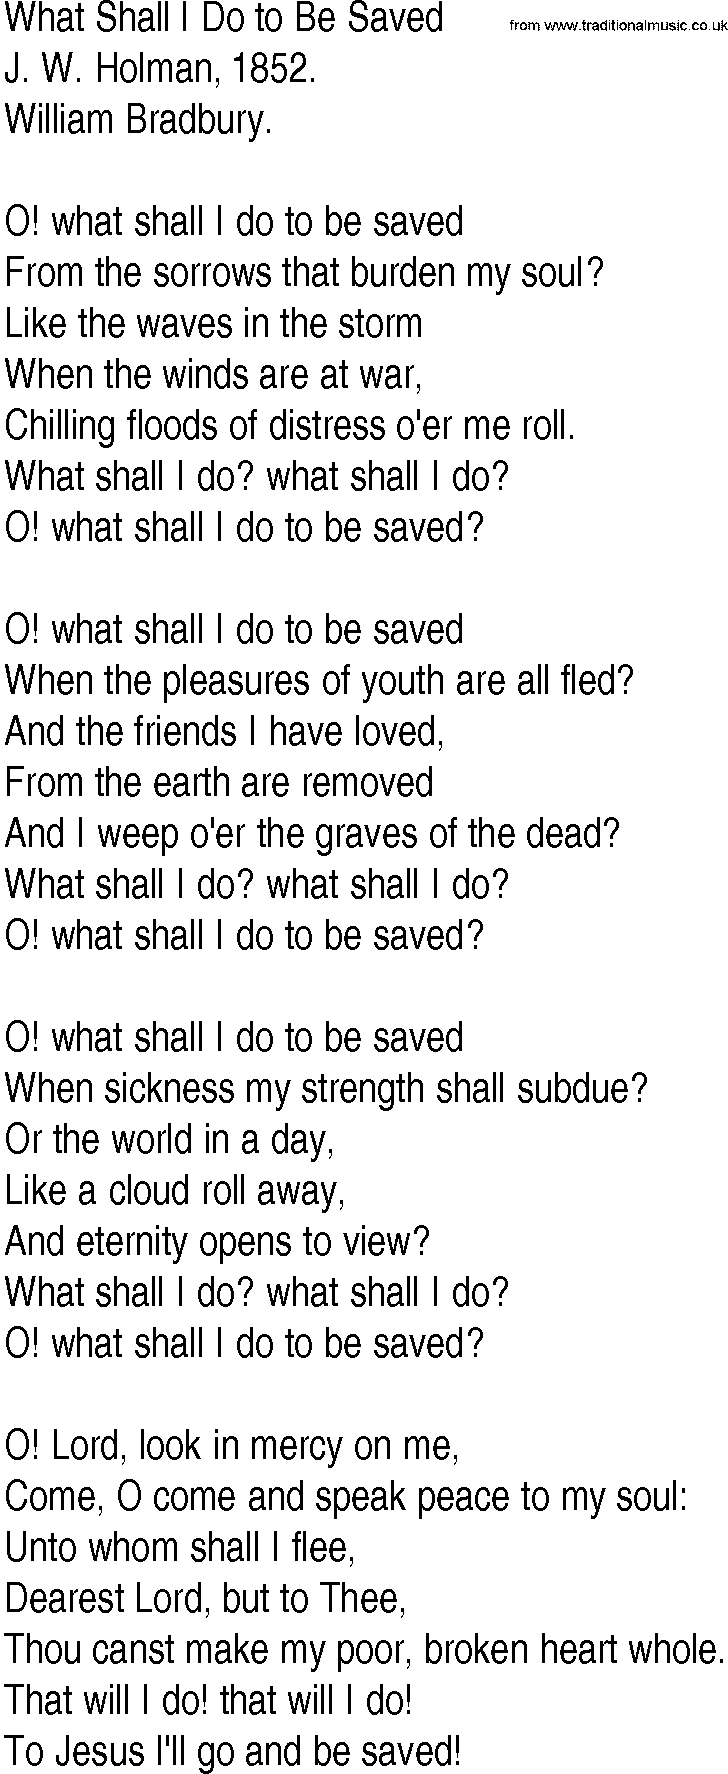 Hymn and Gospel Song: What Shall I Do to Be Saved by J W Holman lyrics